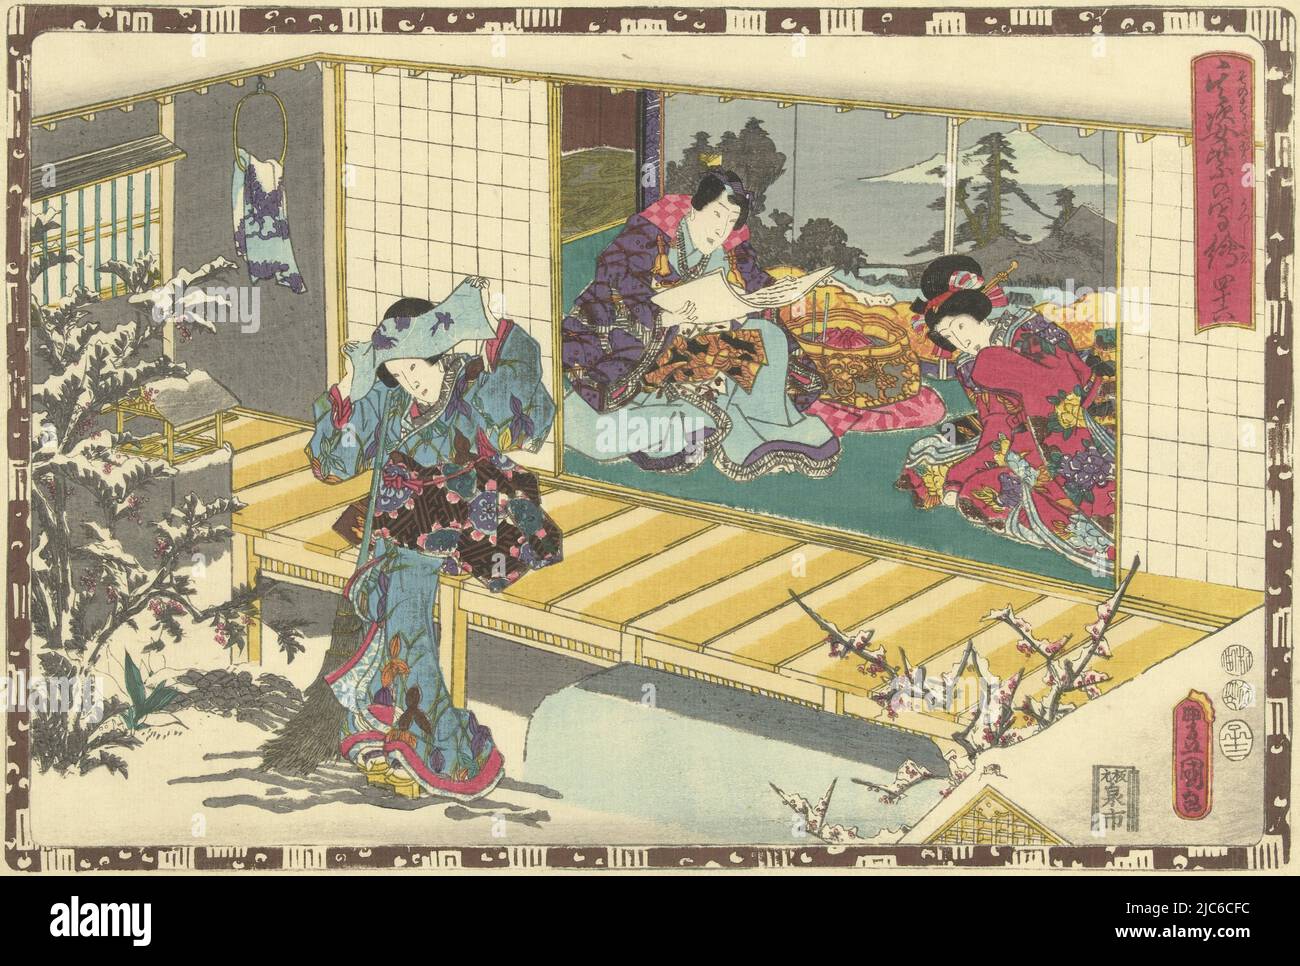 Woman with broom in snowy garden, behind which, through opened wall, face of room with woman and reading man seated near stove. Representation enclosed by brown border in which Genji emblems., Chapter 46 Faithful Depictions of the Splendid Prince (series title) Sono sugata Hikaru no utsushi-e (series title on object), print maker: Kunisada (I), Utagawa, (mentioned on object), Kinugasa Fusajiro, (mentioned on object), Murata Heiemon, (mentioned on object), print maker: Japan, Tokyo, Tokyo, publisher: Tokyo, 1852, paper, colour woodcut, h 252 mm × w 373 mm Stock Photo